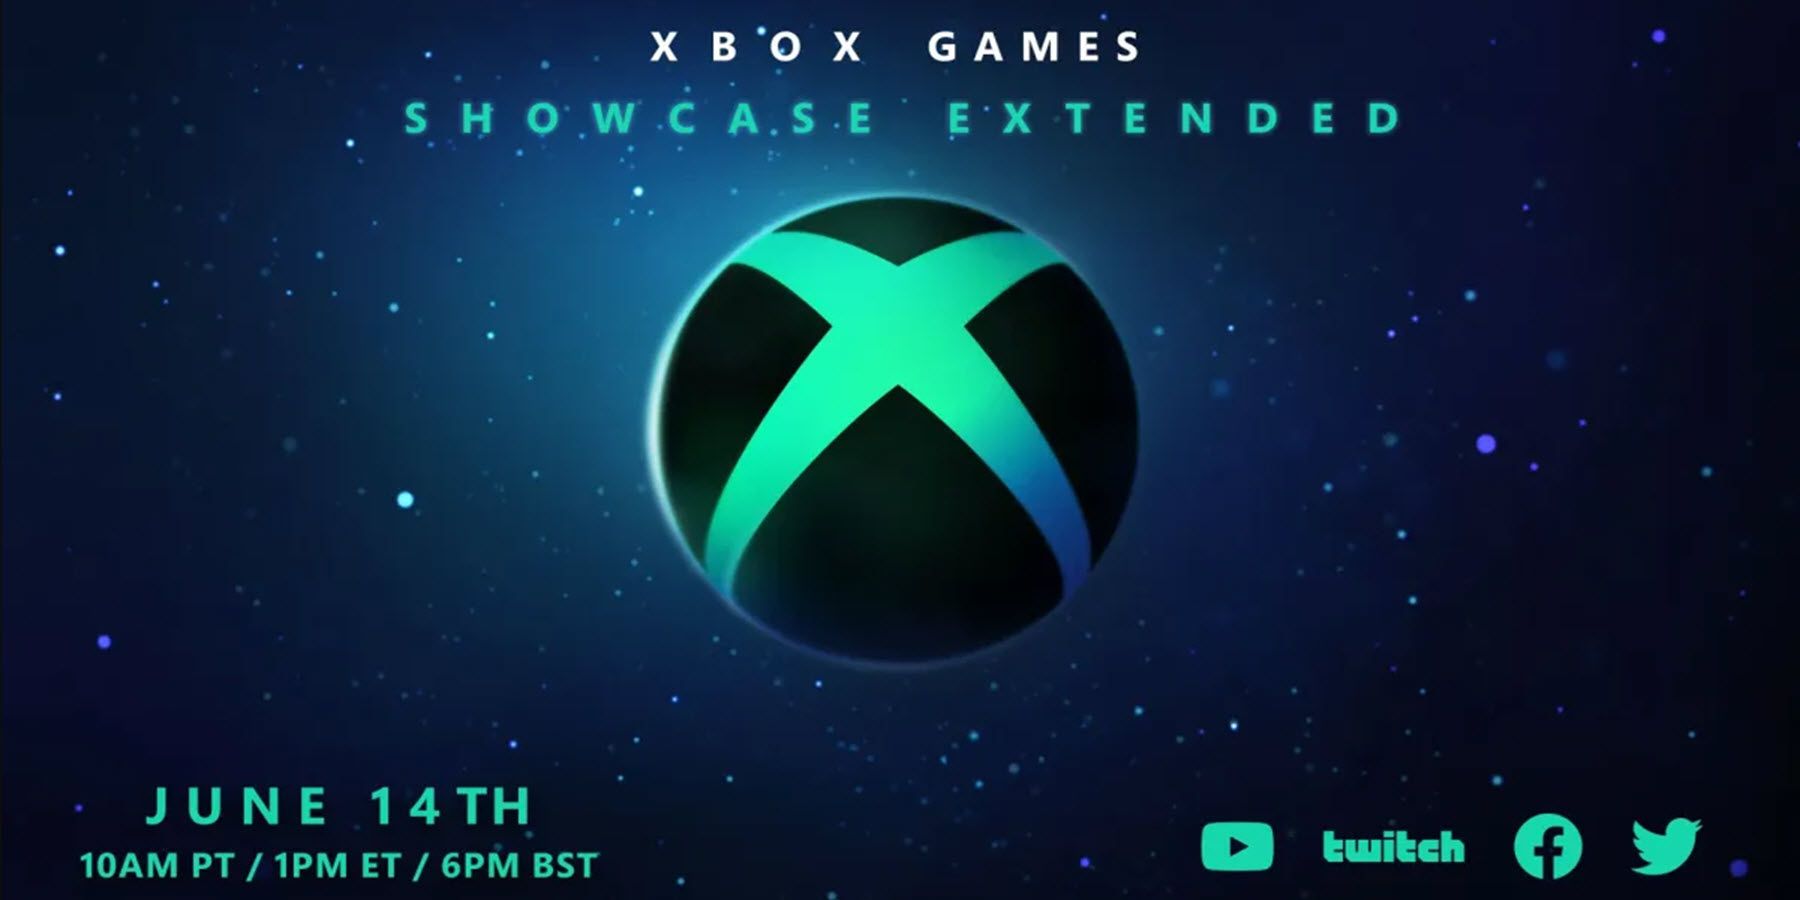 Microsoft Confirms Xbox Games Showcase Extended With More Trailers and